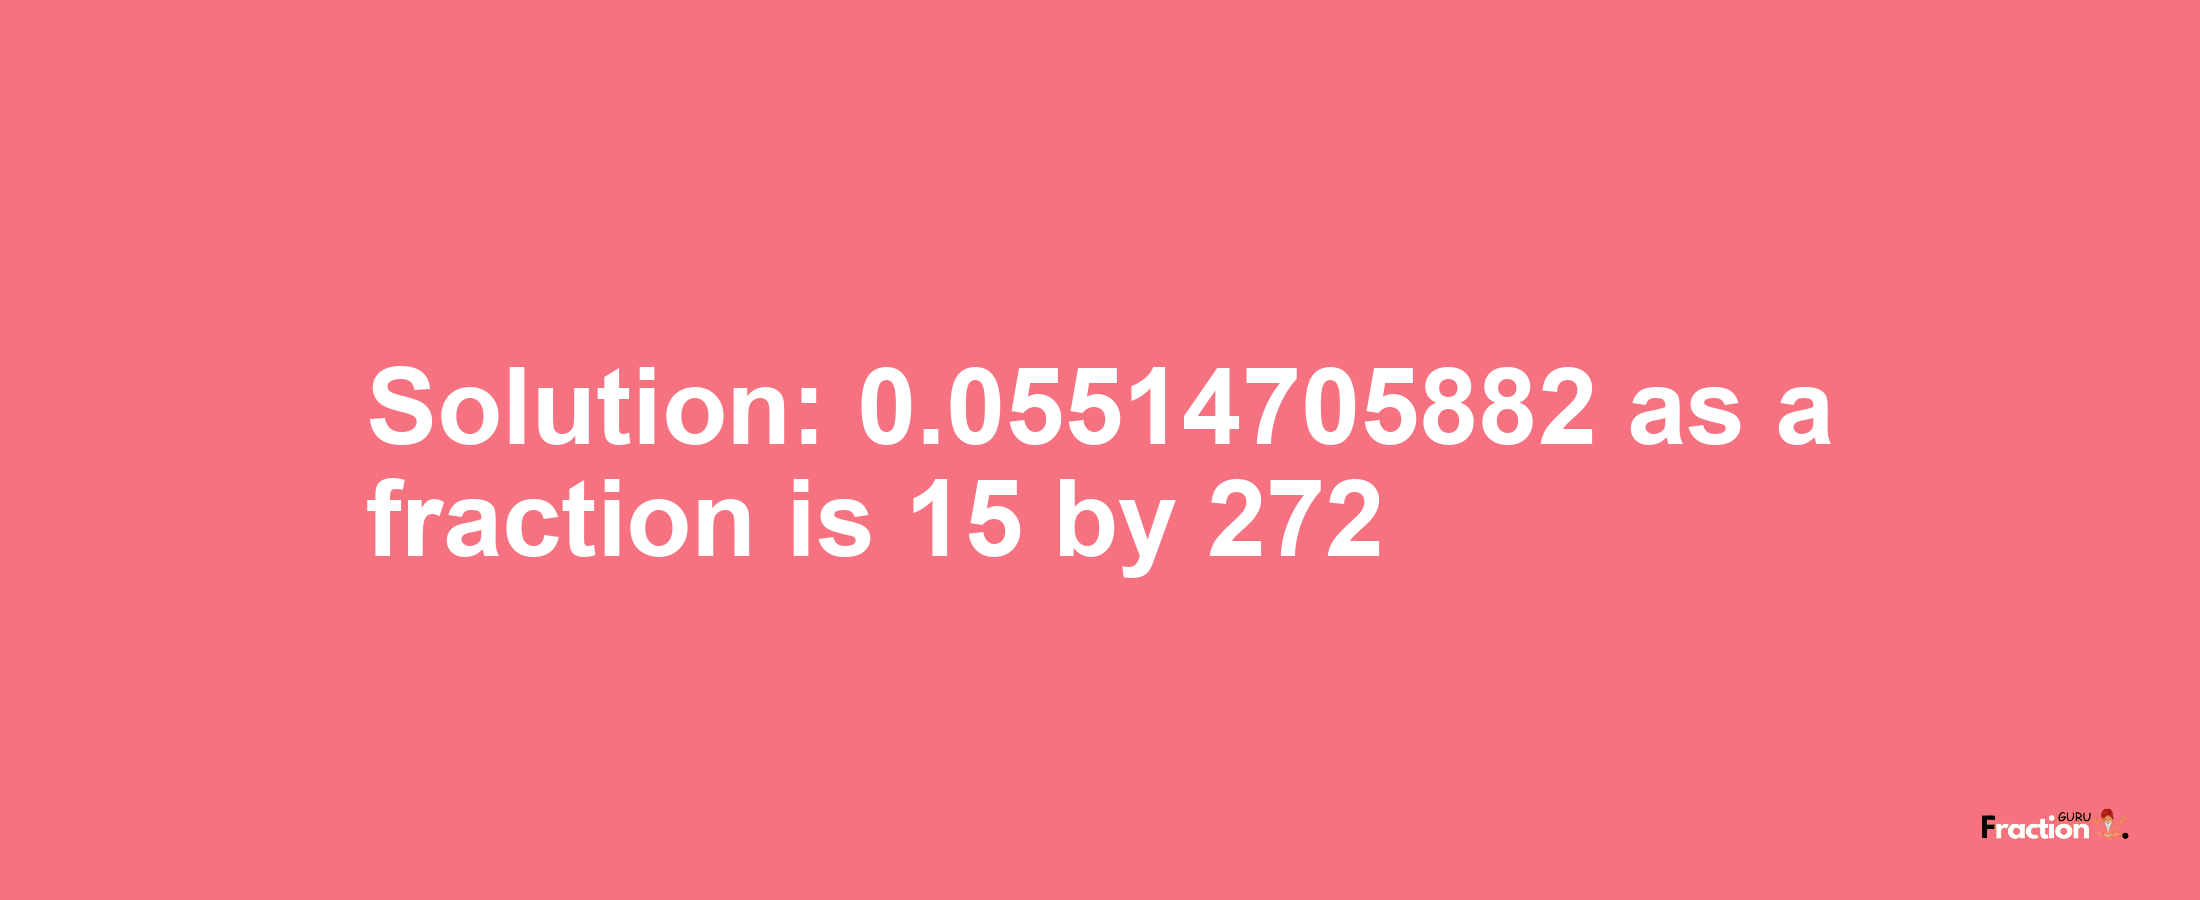 Solution:0.05514705882 as a fraction is 15/272